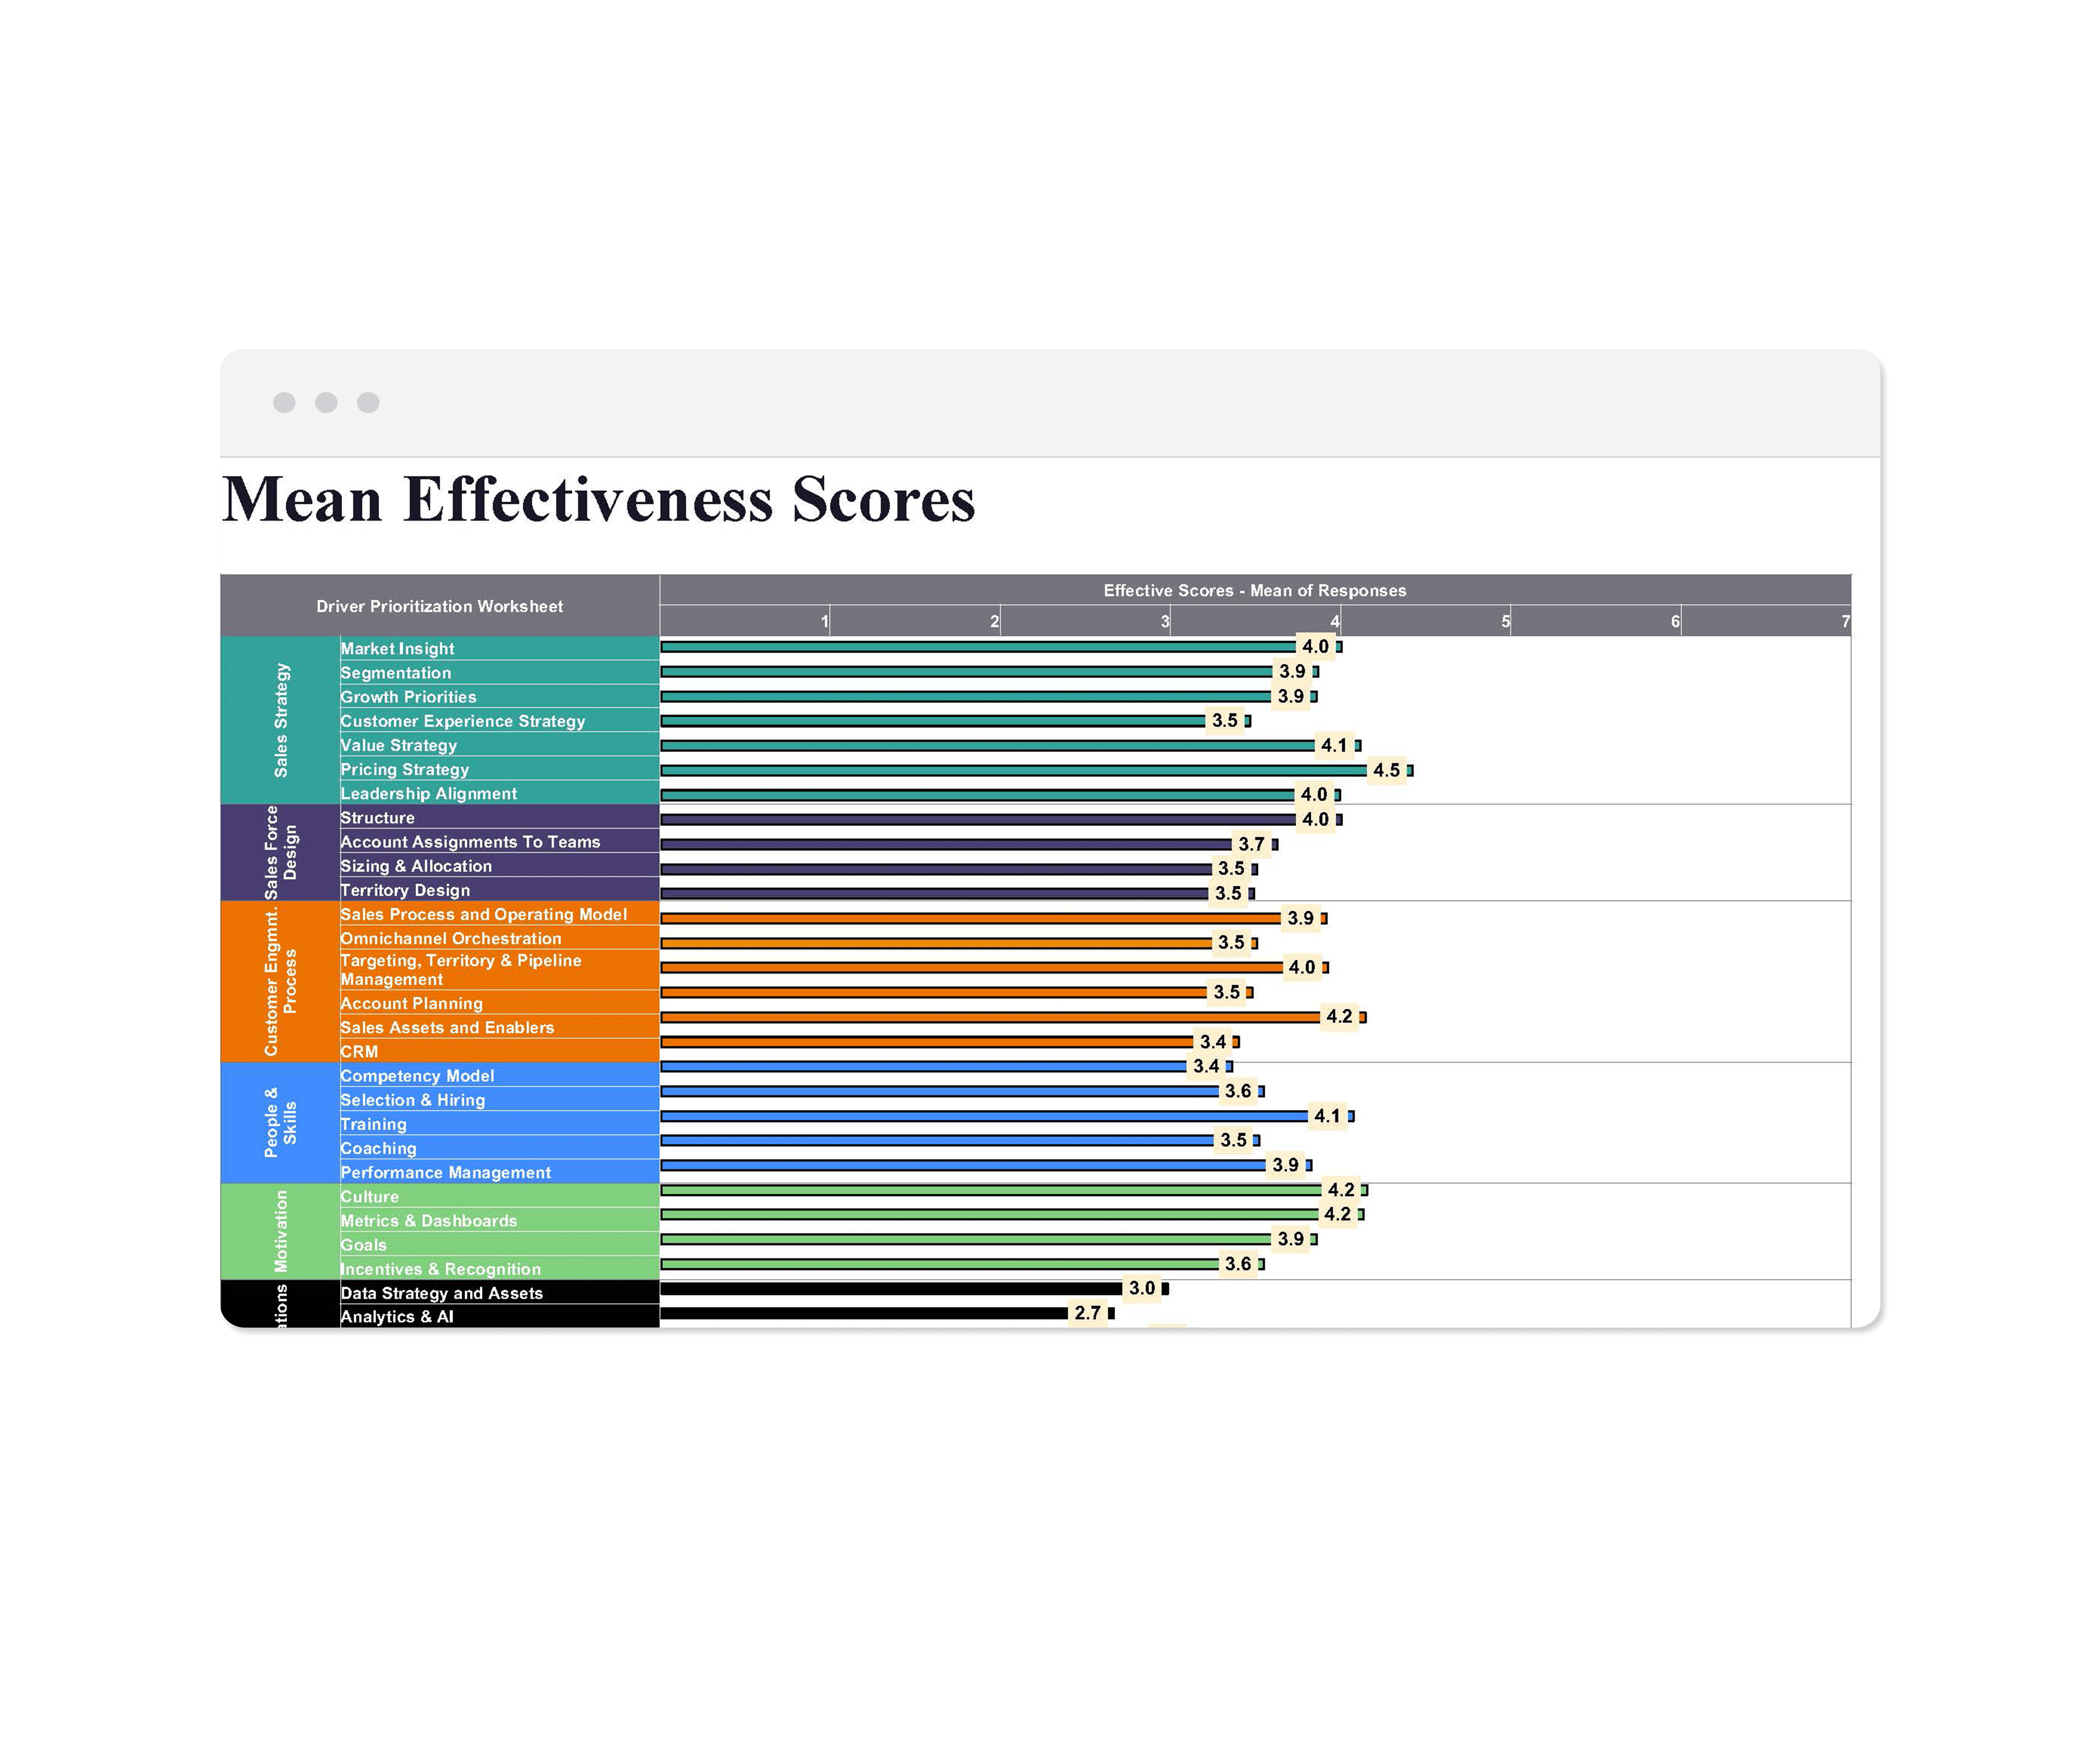 Mean effectiveness scores by driver